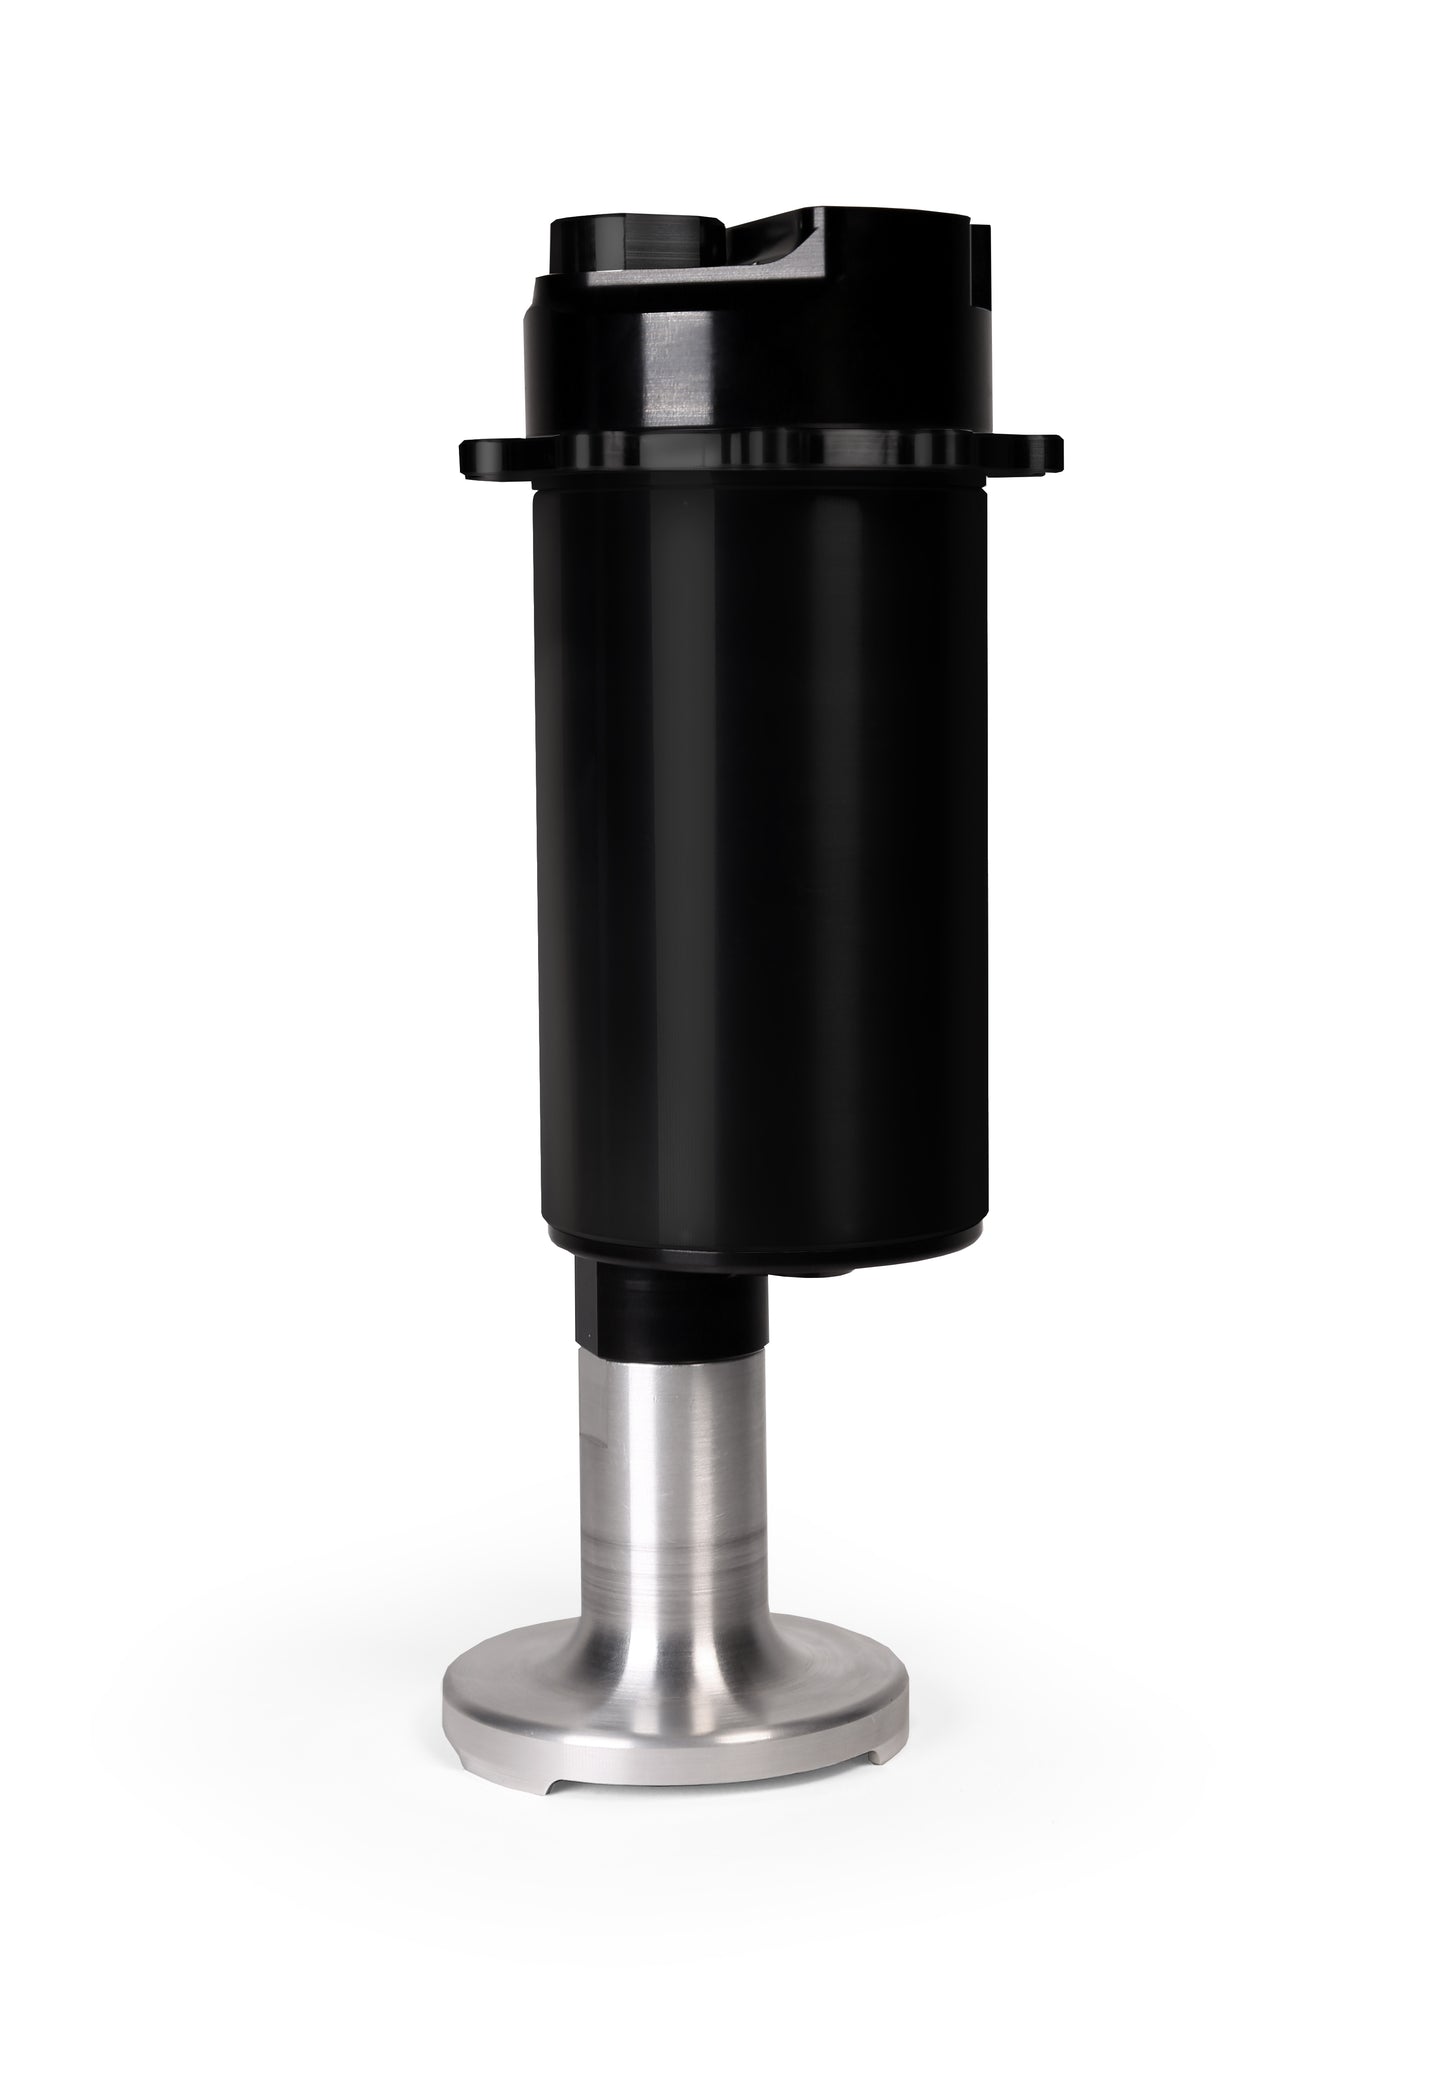 A1000 Brushless Stealth Fuel Pump